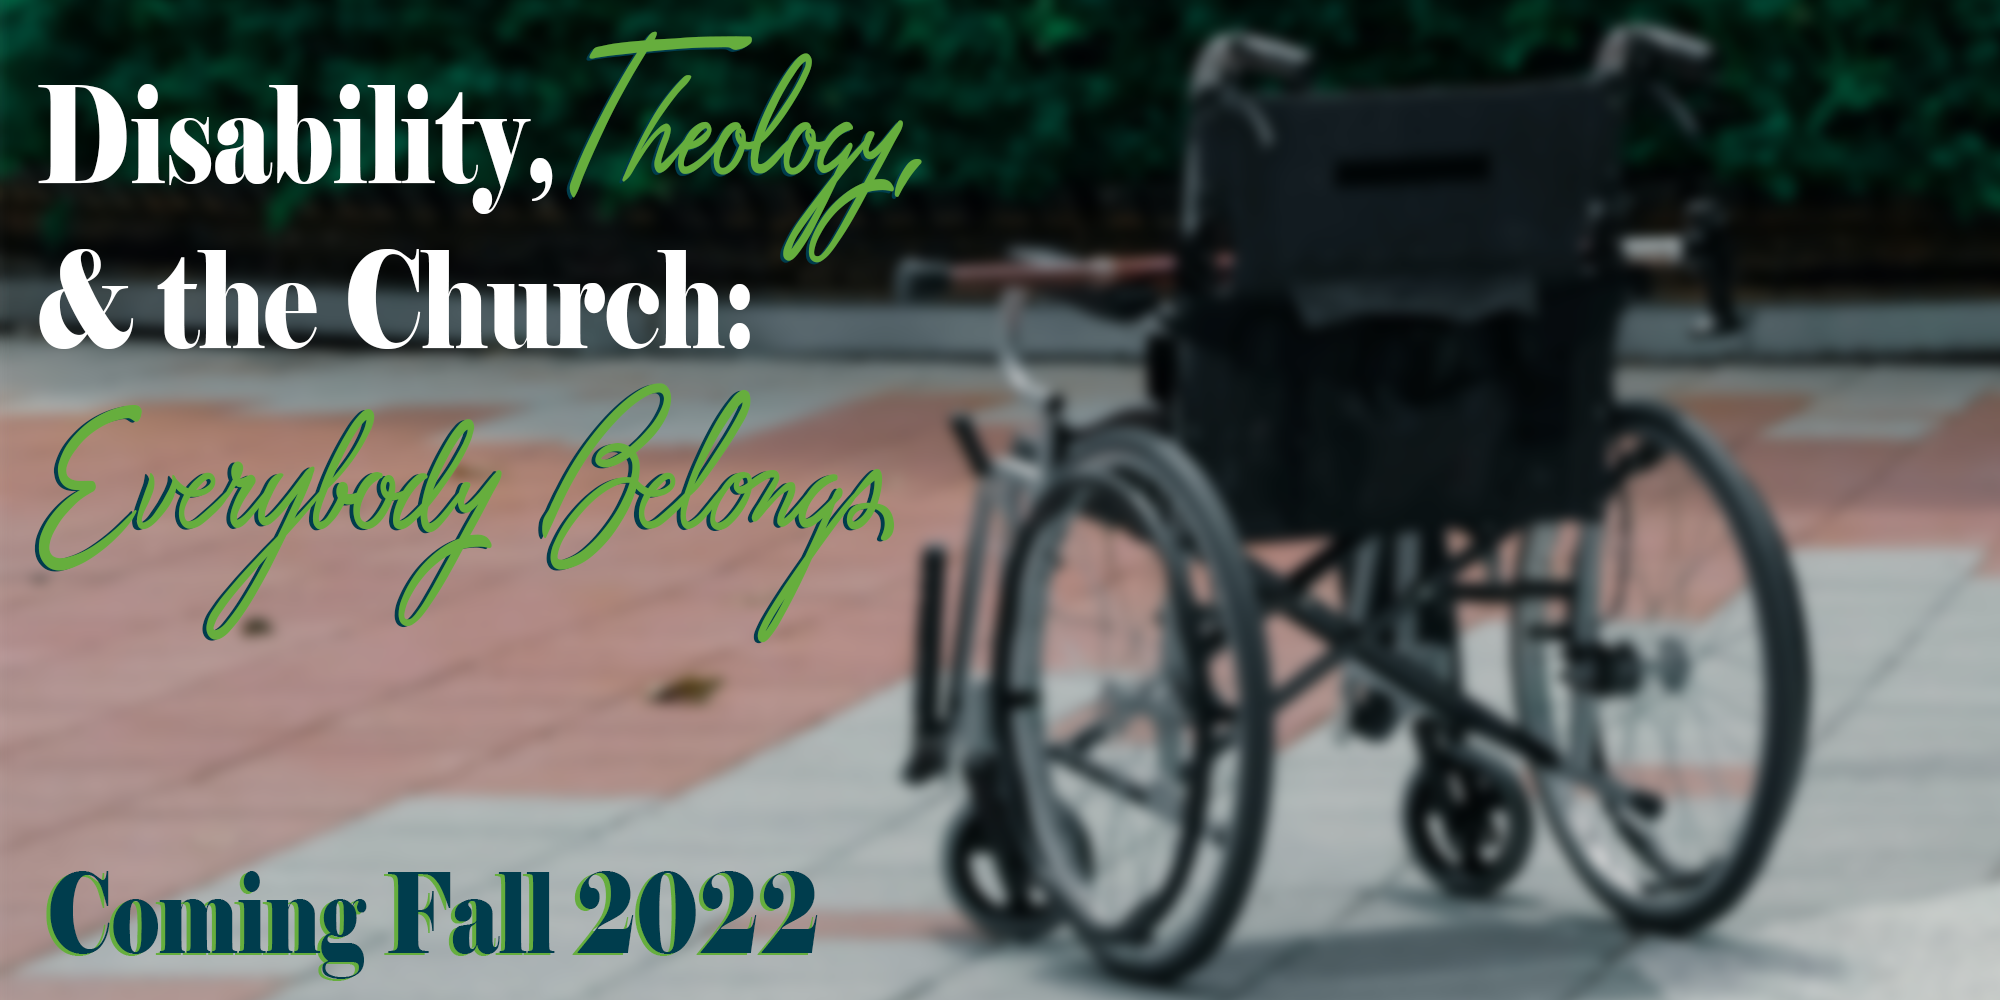 Disability, Theology, and the Church. Coming fall 2022.